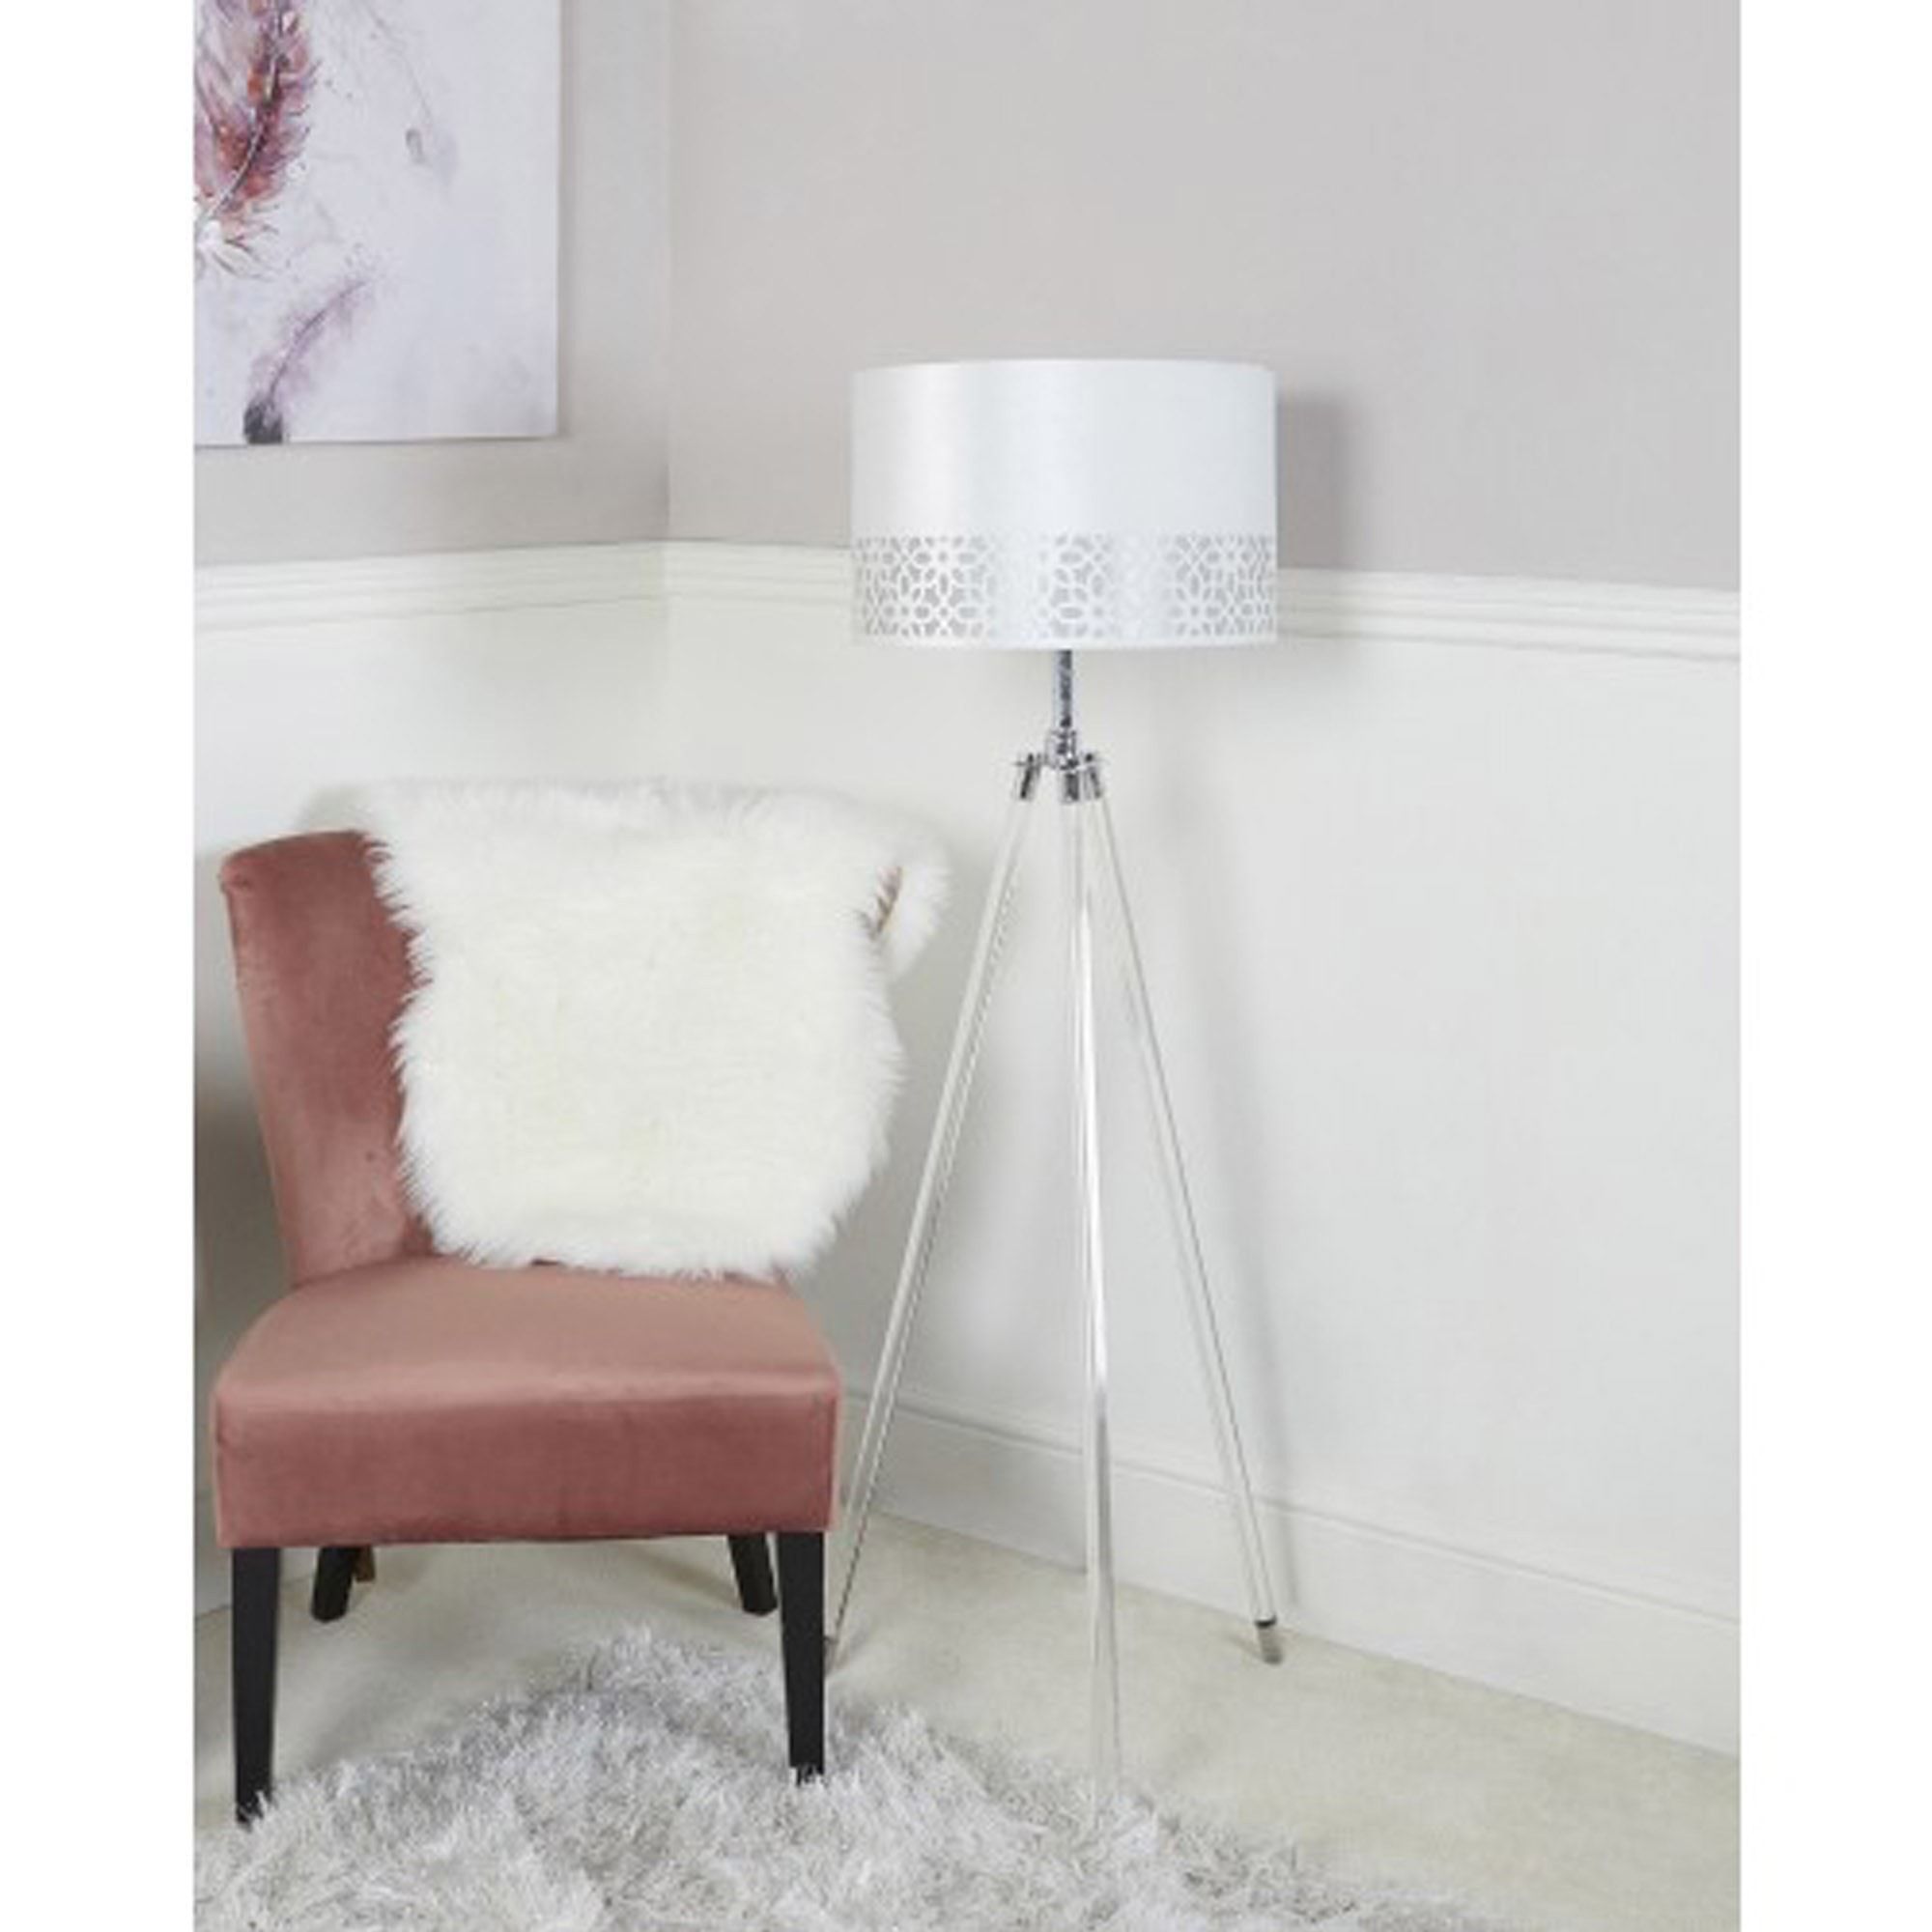 Acrylic Tripod Floor Lamp With White & Silver Shade | Floor Lamps Within Acrylic Floor Lamps (View 12 of 15)